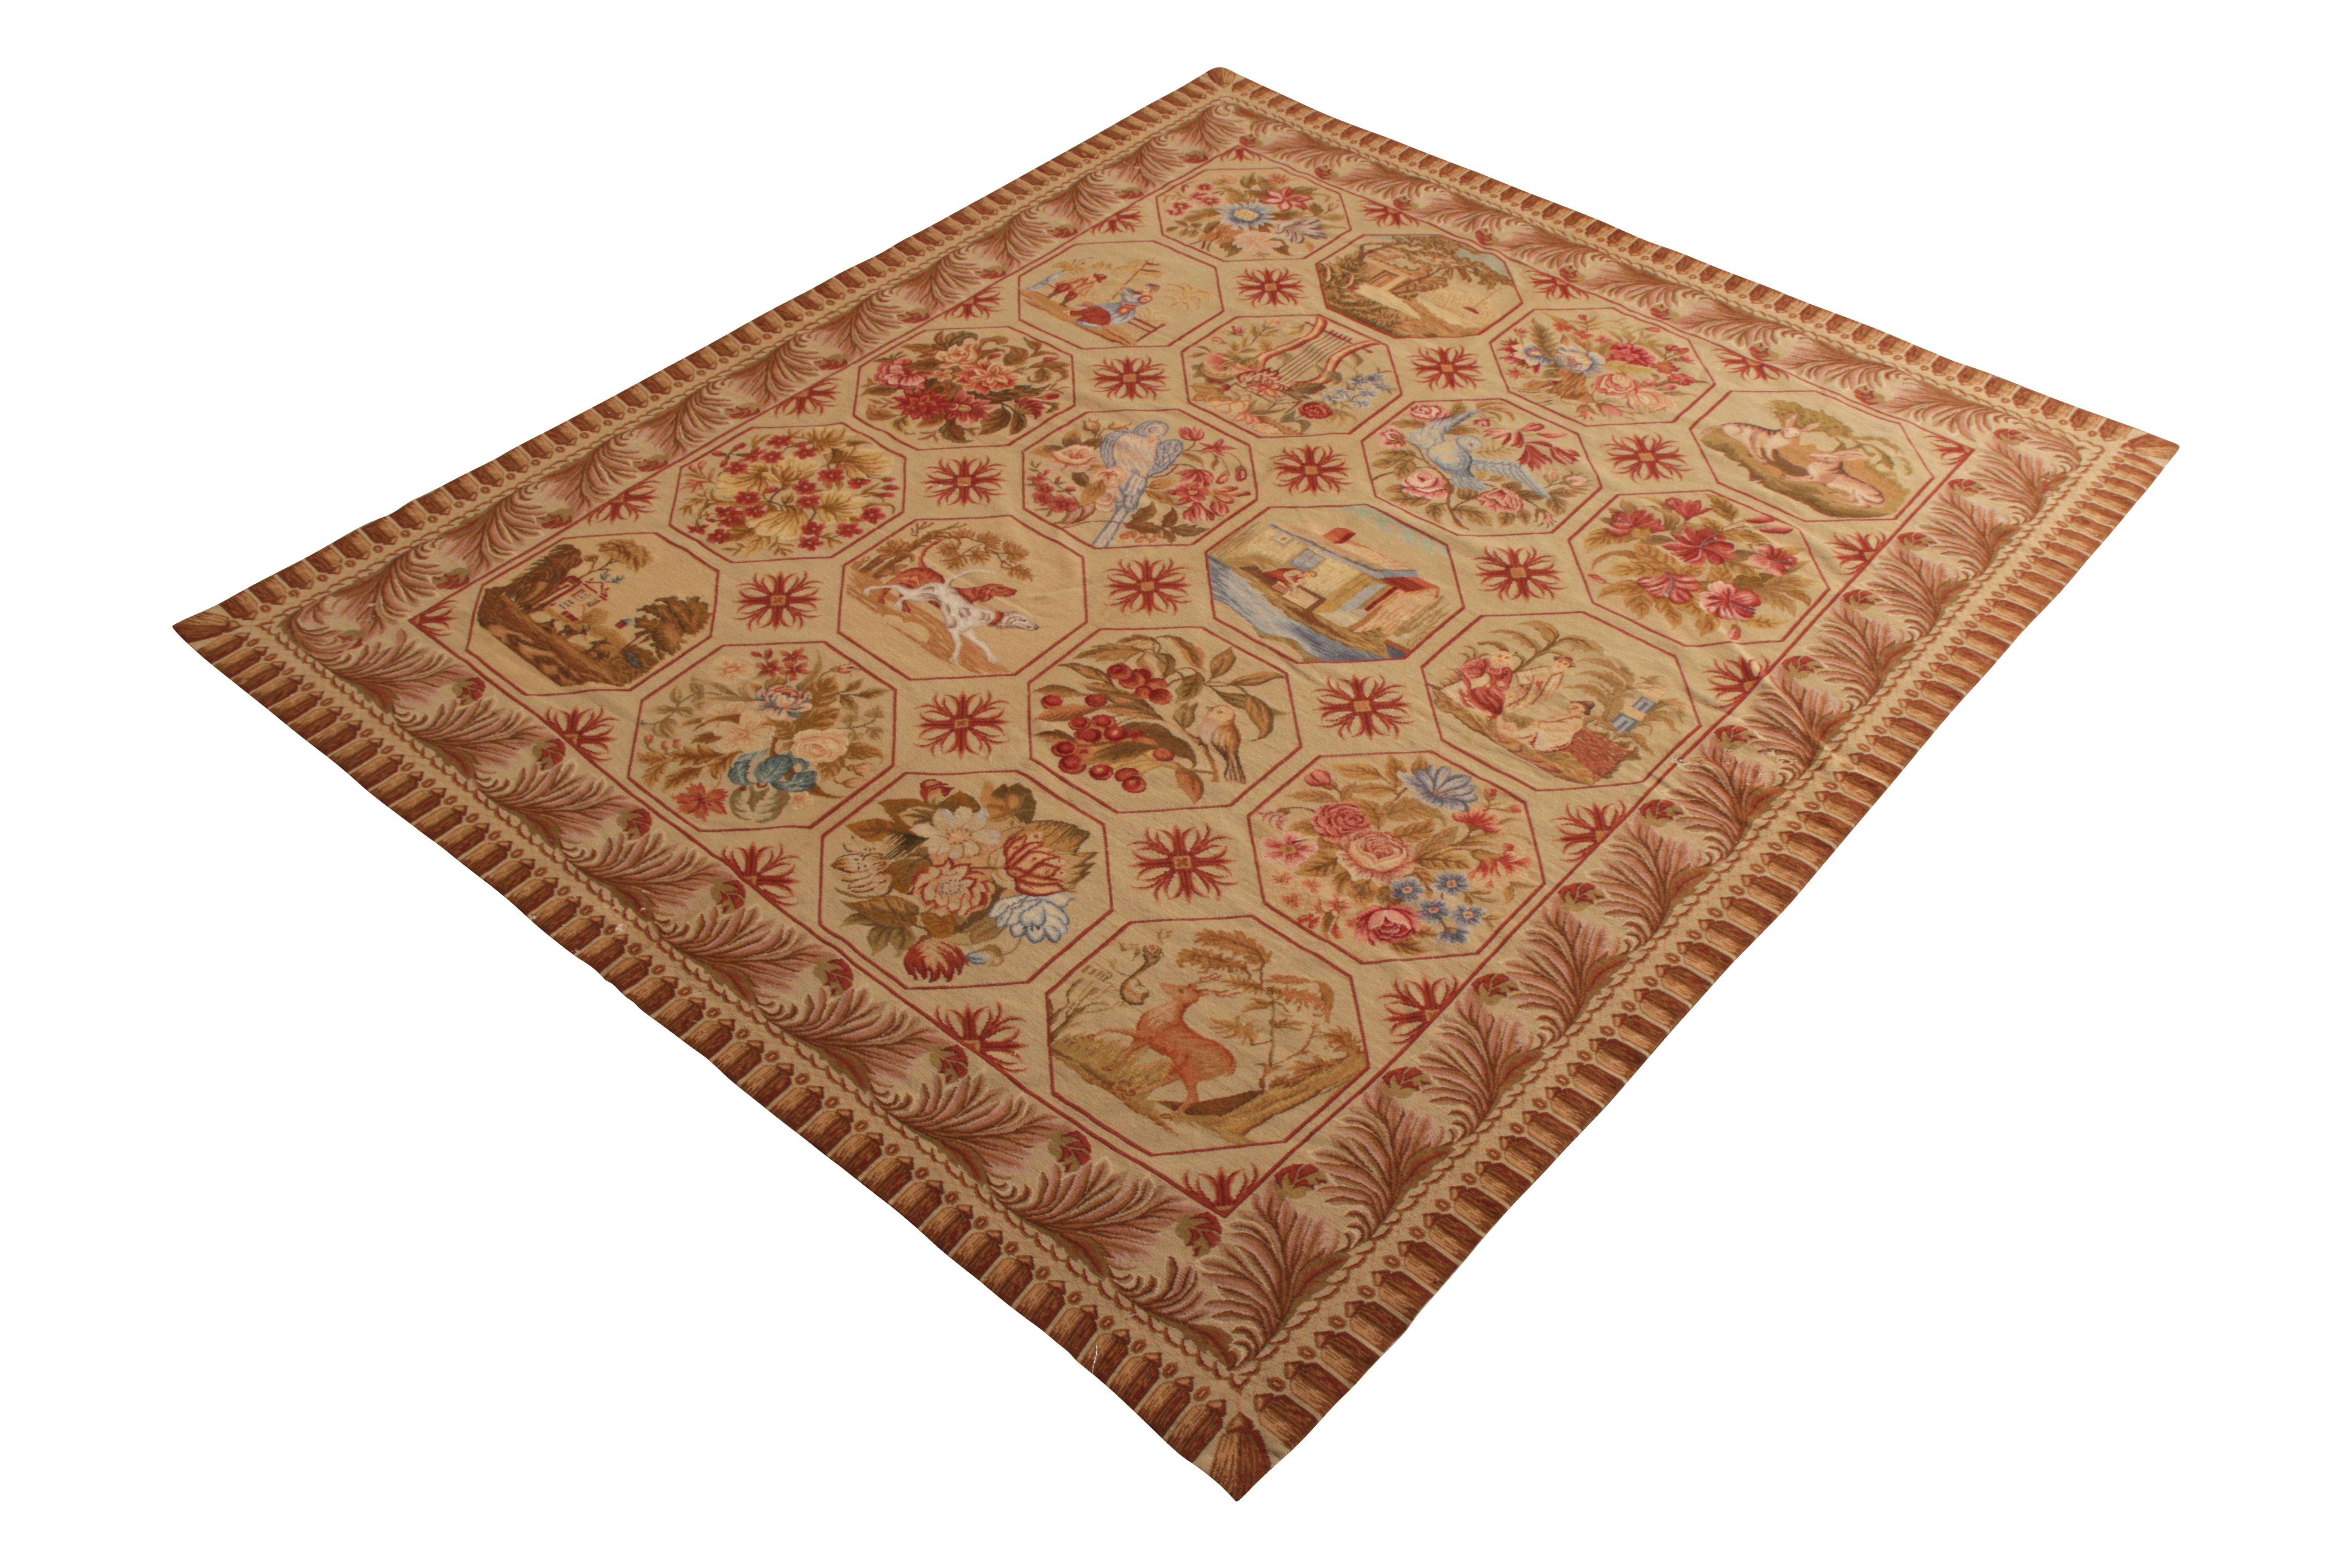 Other Antique Needlepoint Rug in Beige-Brown Floral Pictorial Pattern by Rug & Kilim For Sale